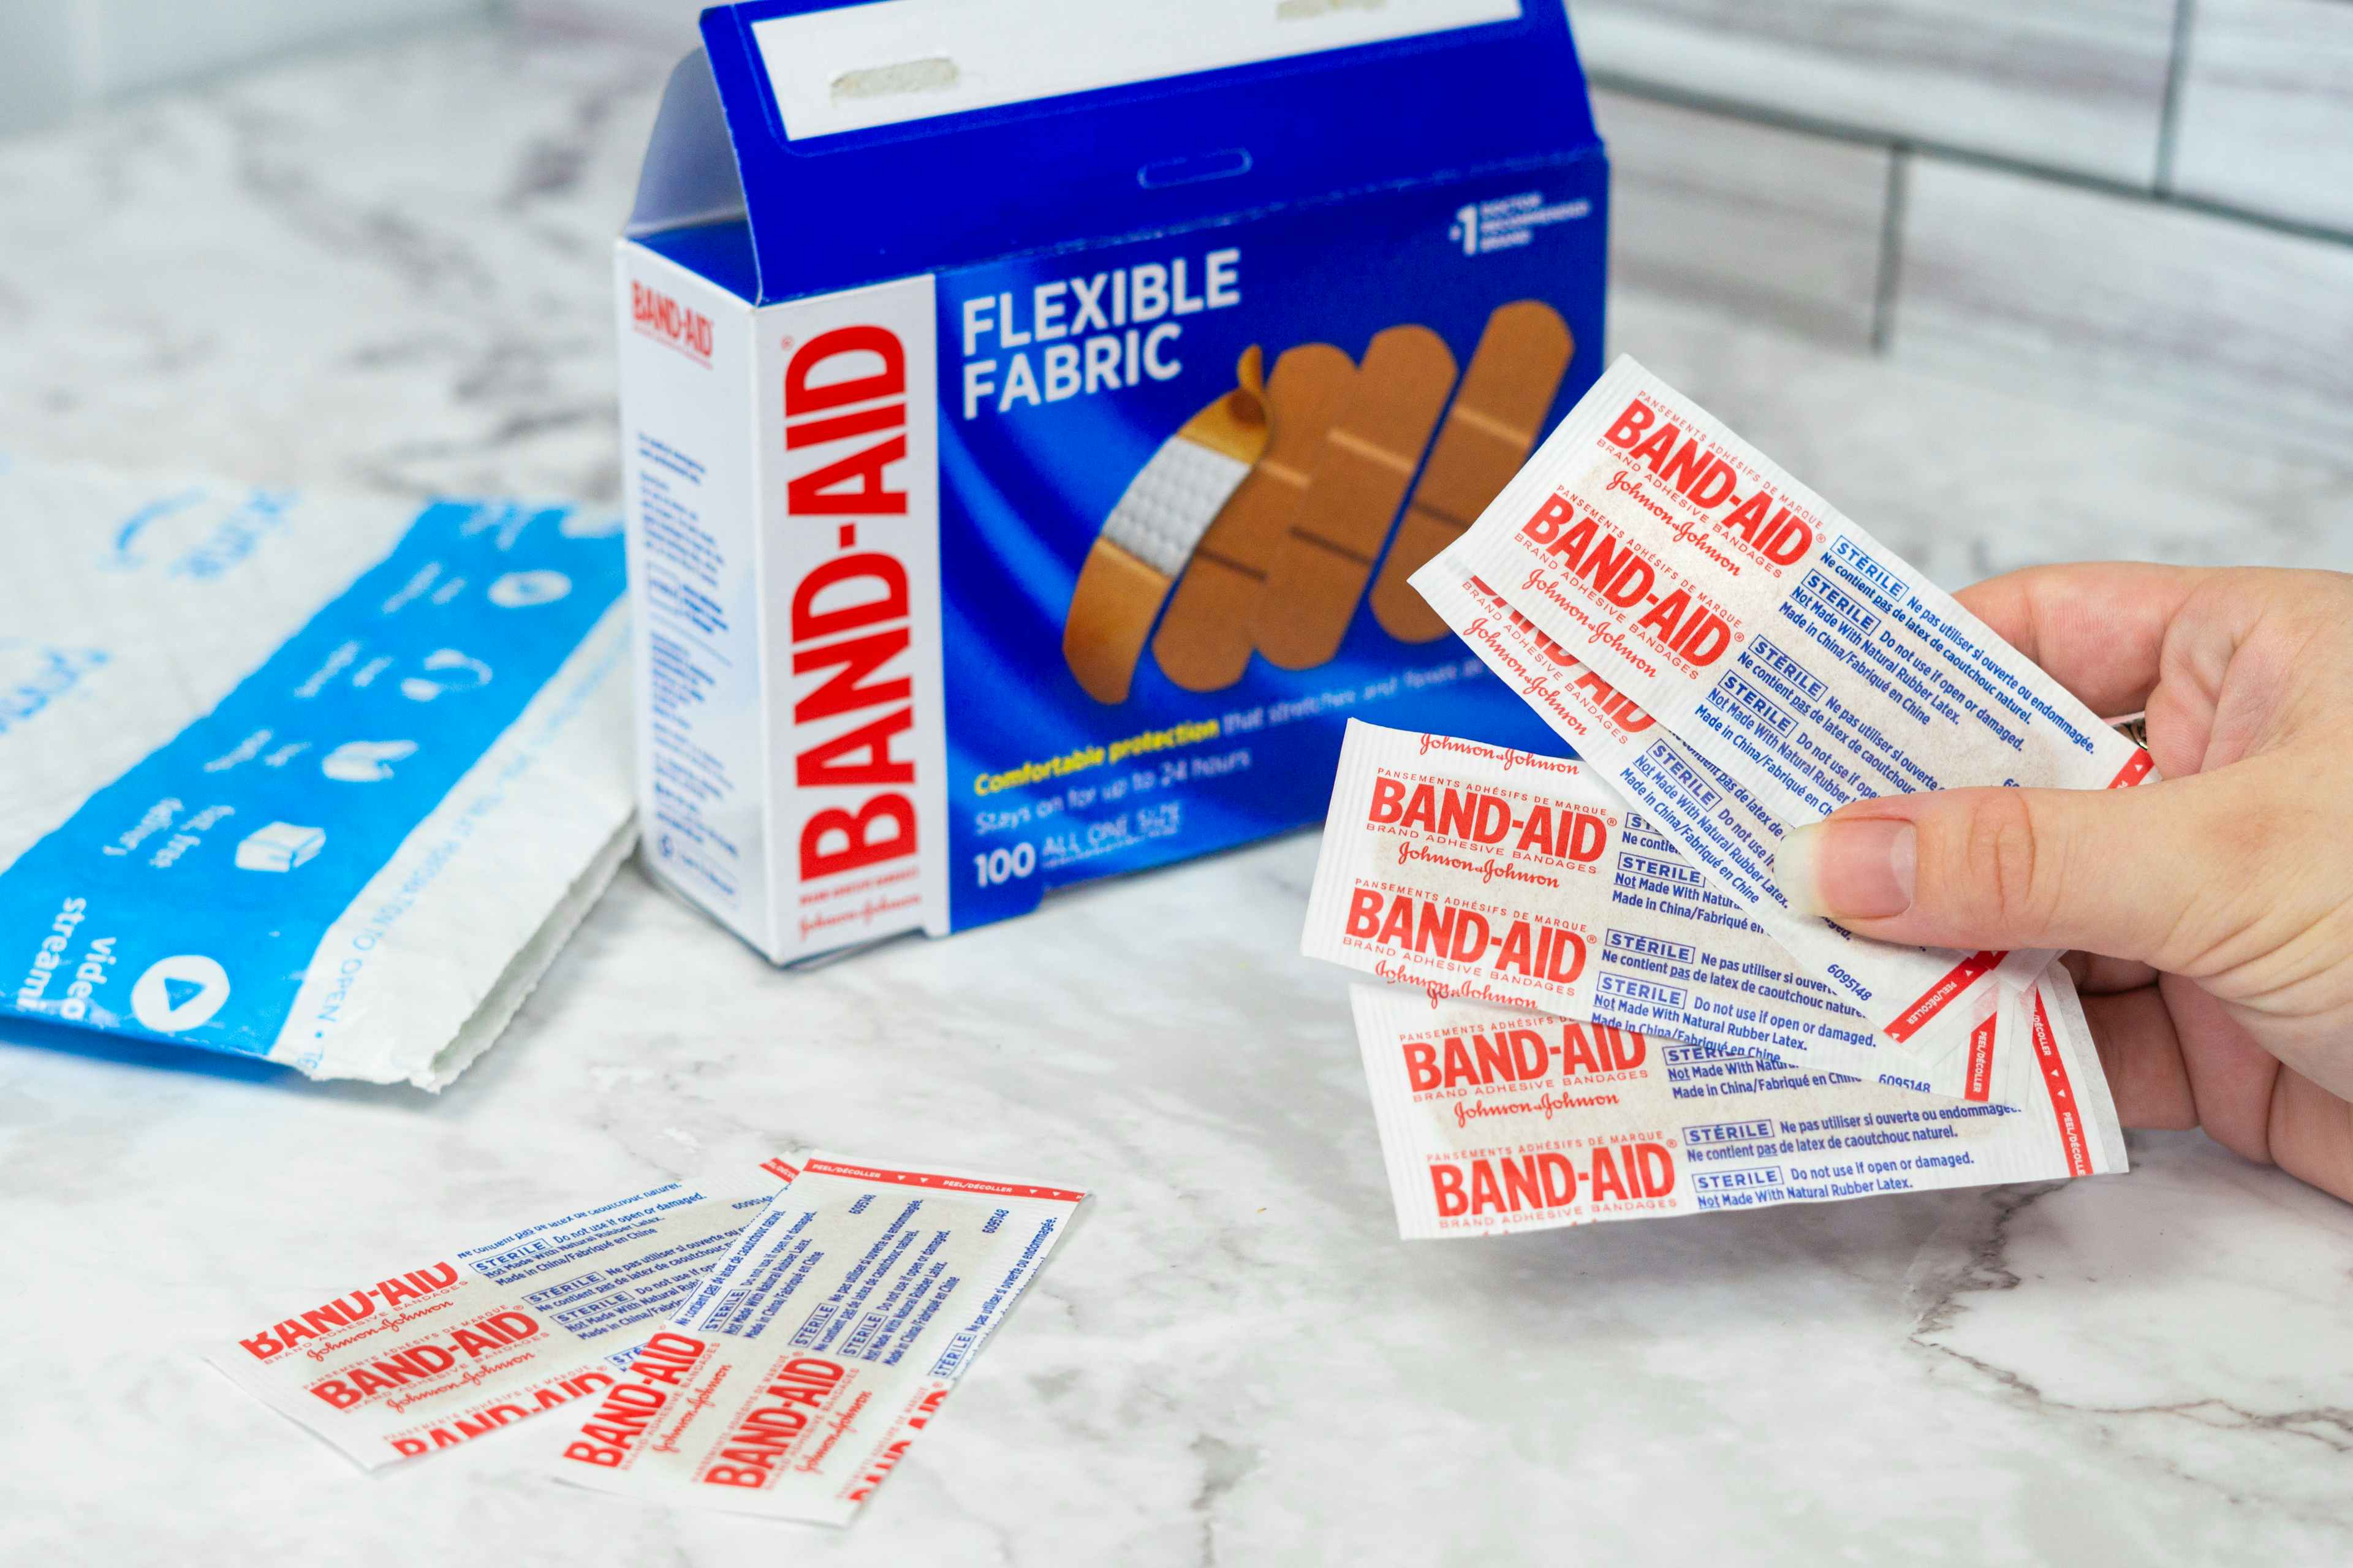 band-aid-bandages-flexible-fabric-amazon-review-kcl-1